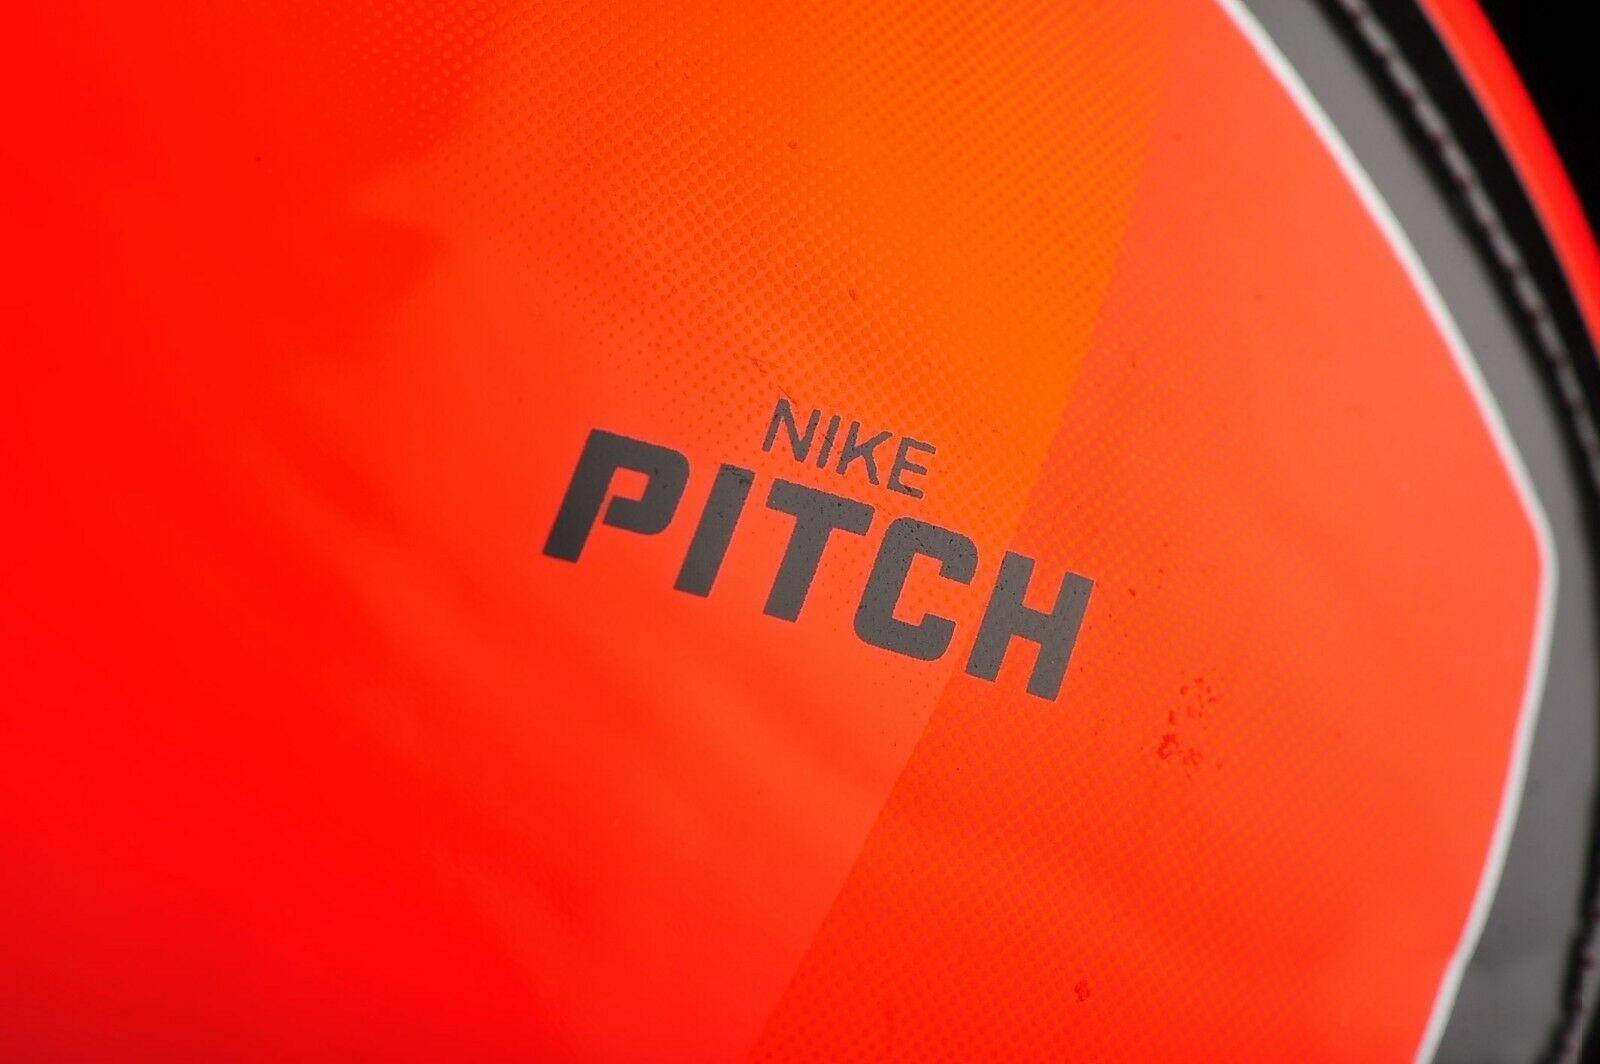 Red Sports Equipment Logo - Nike Pitch Football Ball Soccer Bright University Red White Size 5